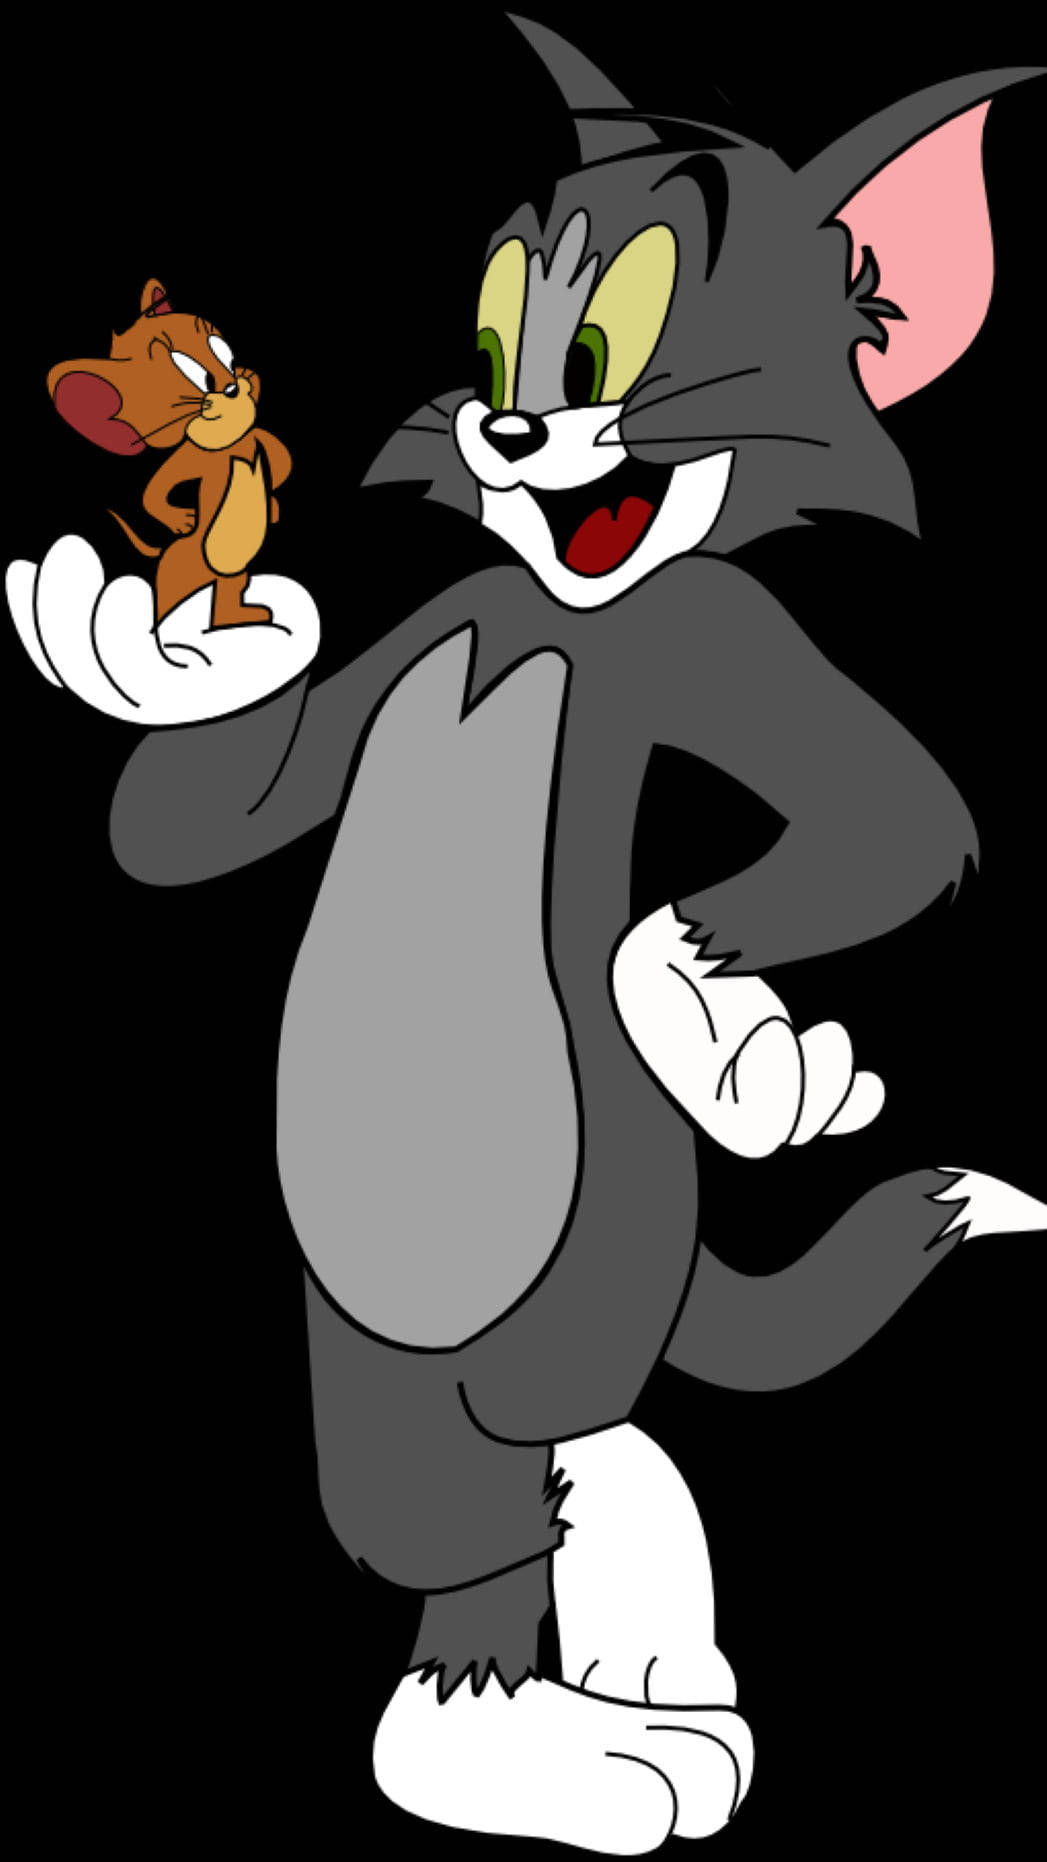 Download Cute Tom And Jerry Black Background Wallpaper 